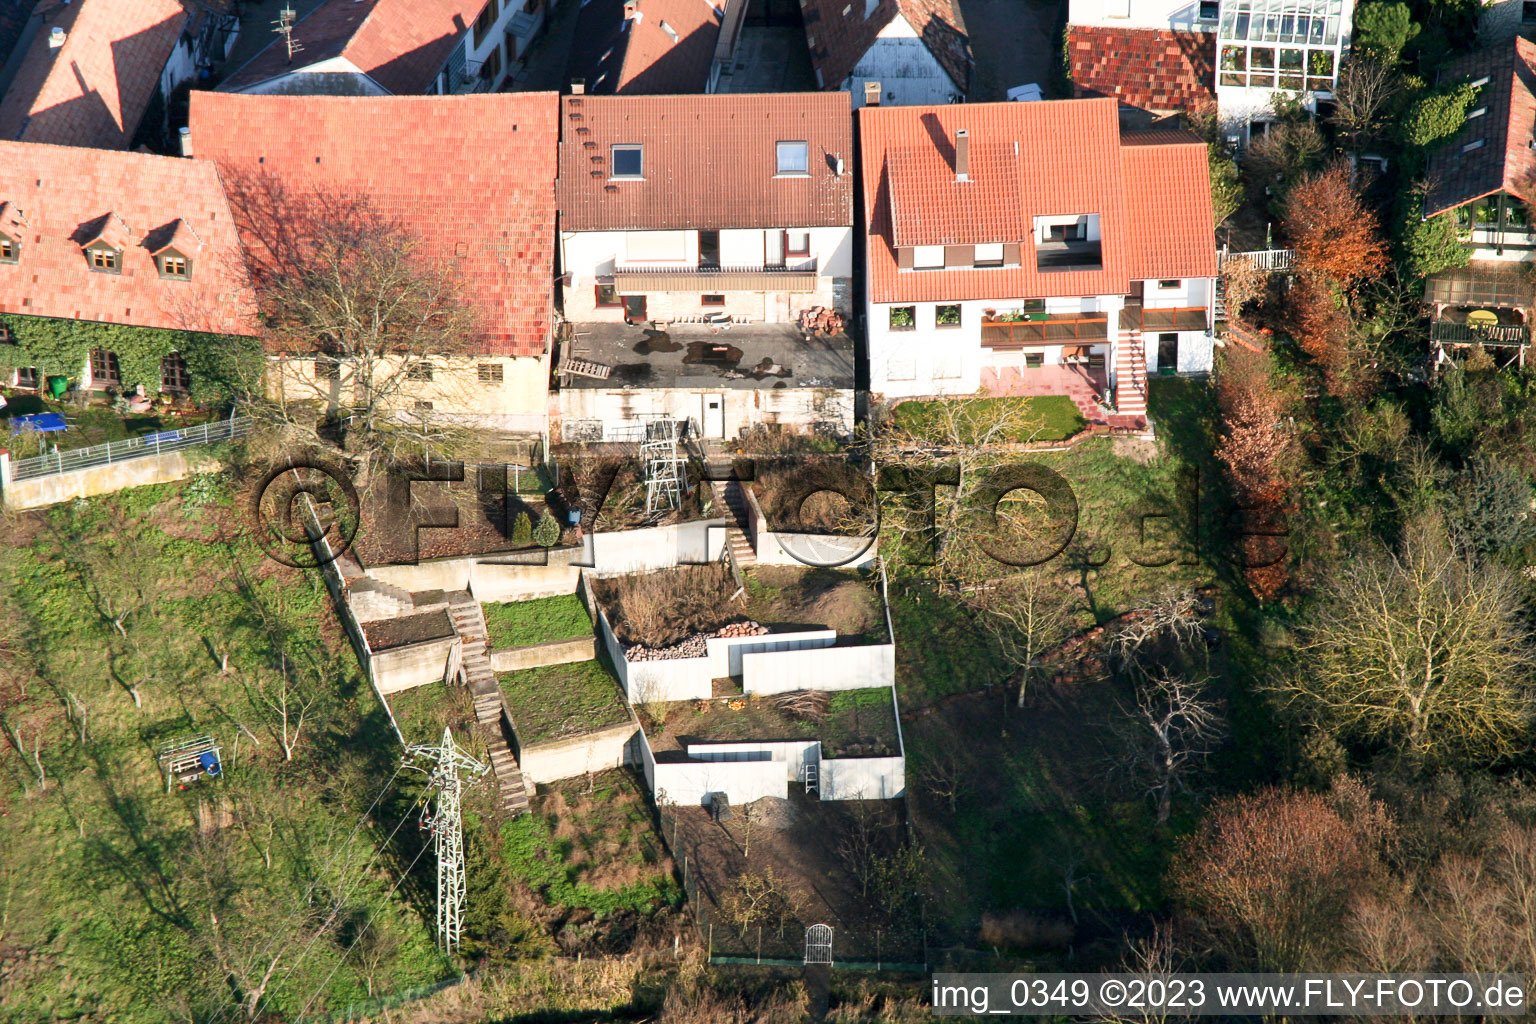 Aerial photograpy of Ludwigstr in Jockgrim in the state Rhineland-Palatinate, Germany